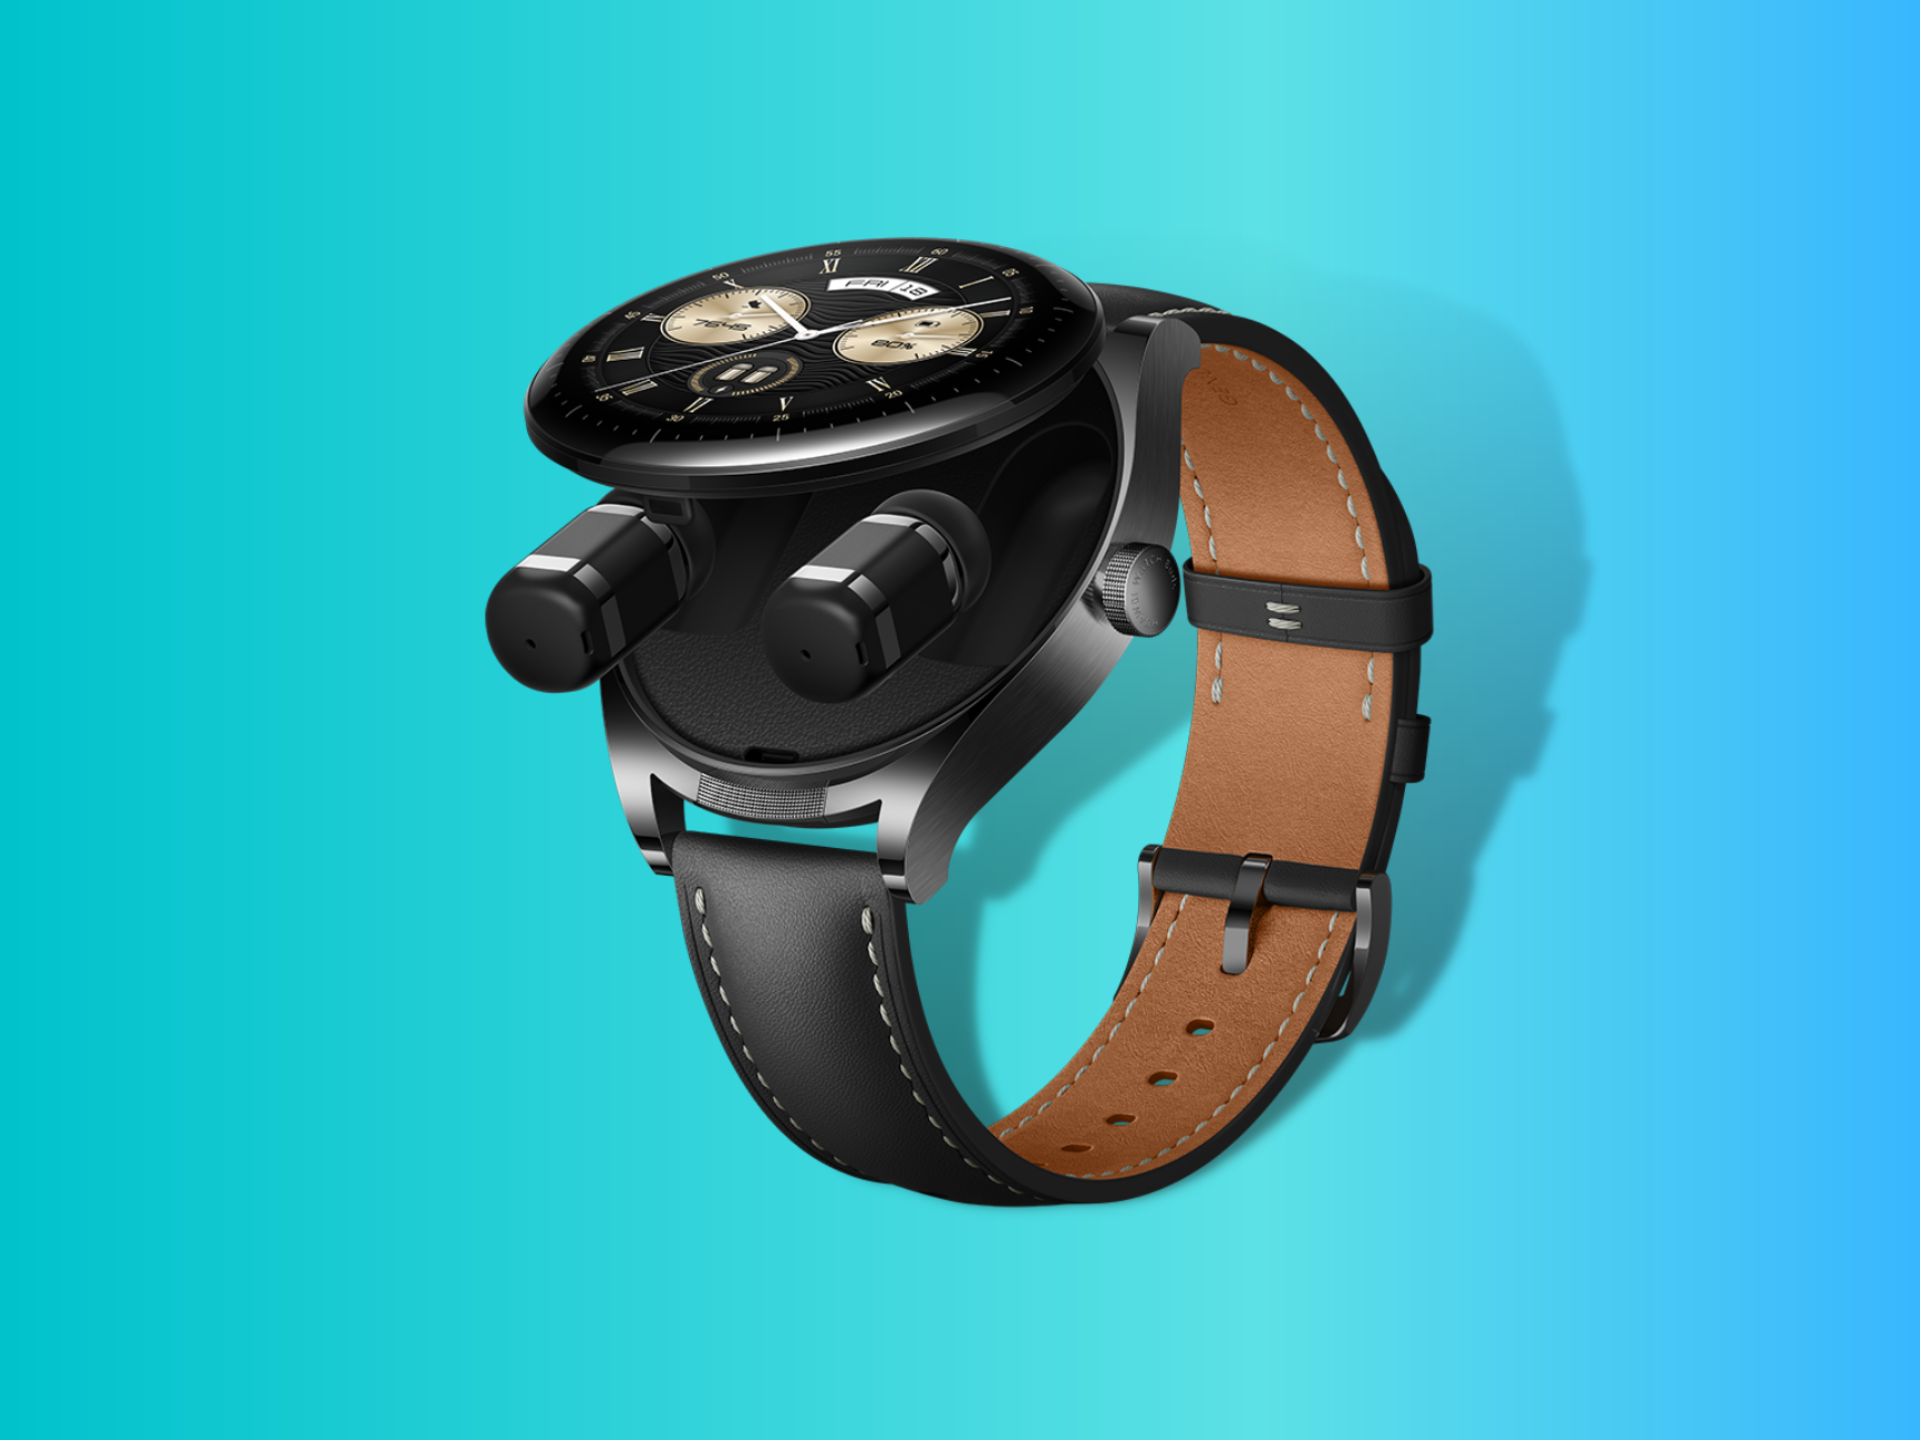 HUAWEI WATCH Buds conceals two earbuds inside a smartwatch